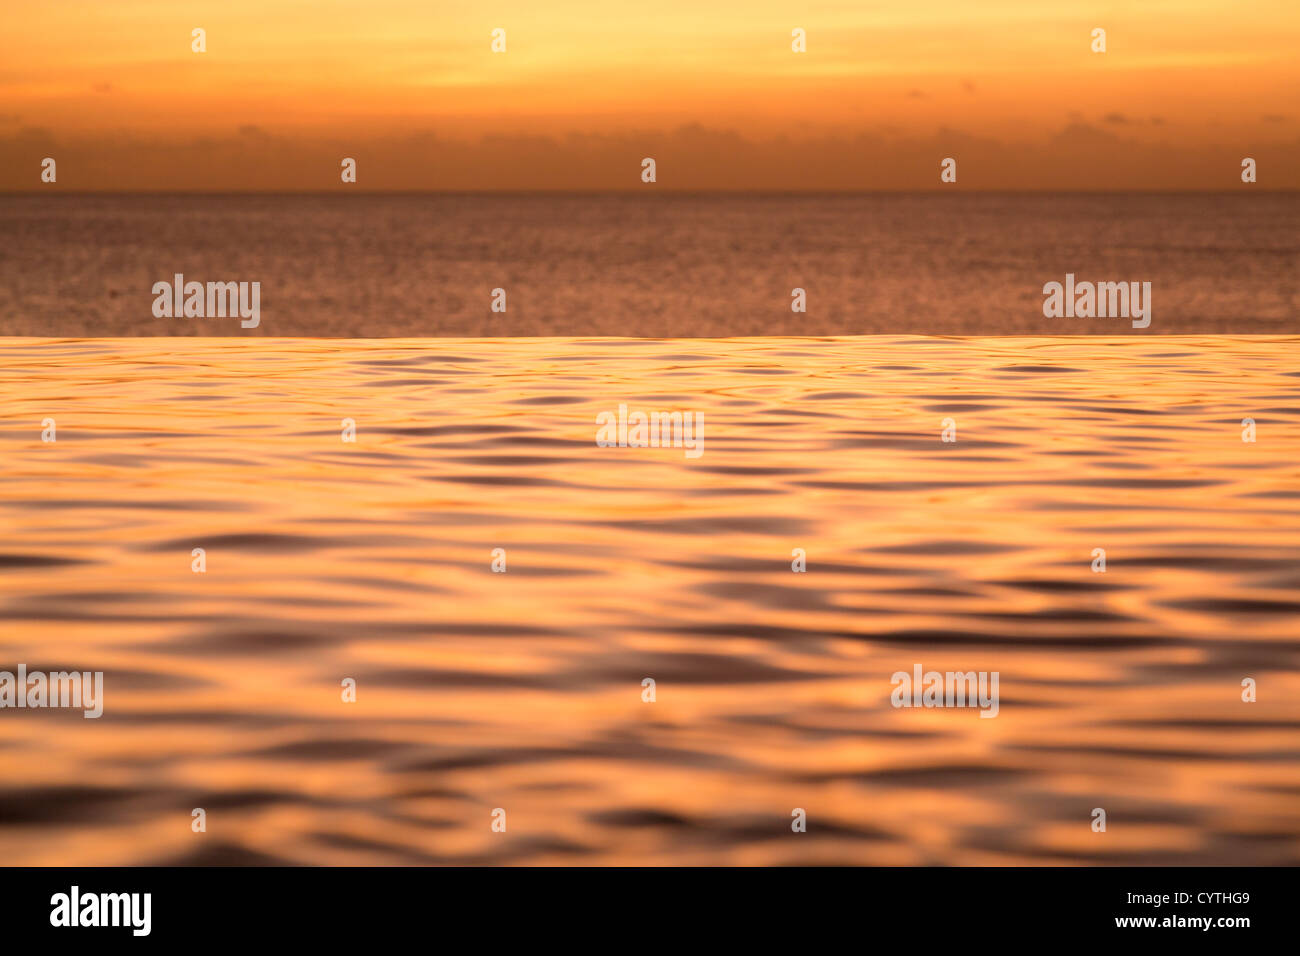 Edge of infinity swimming pool overlooking ocean at sunset Stock Photo